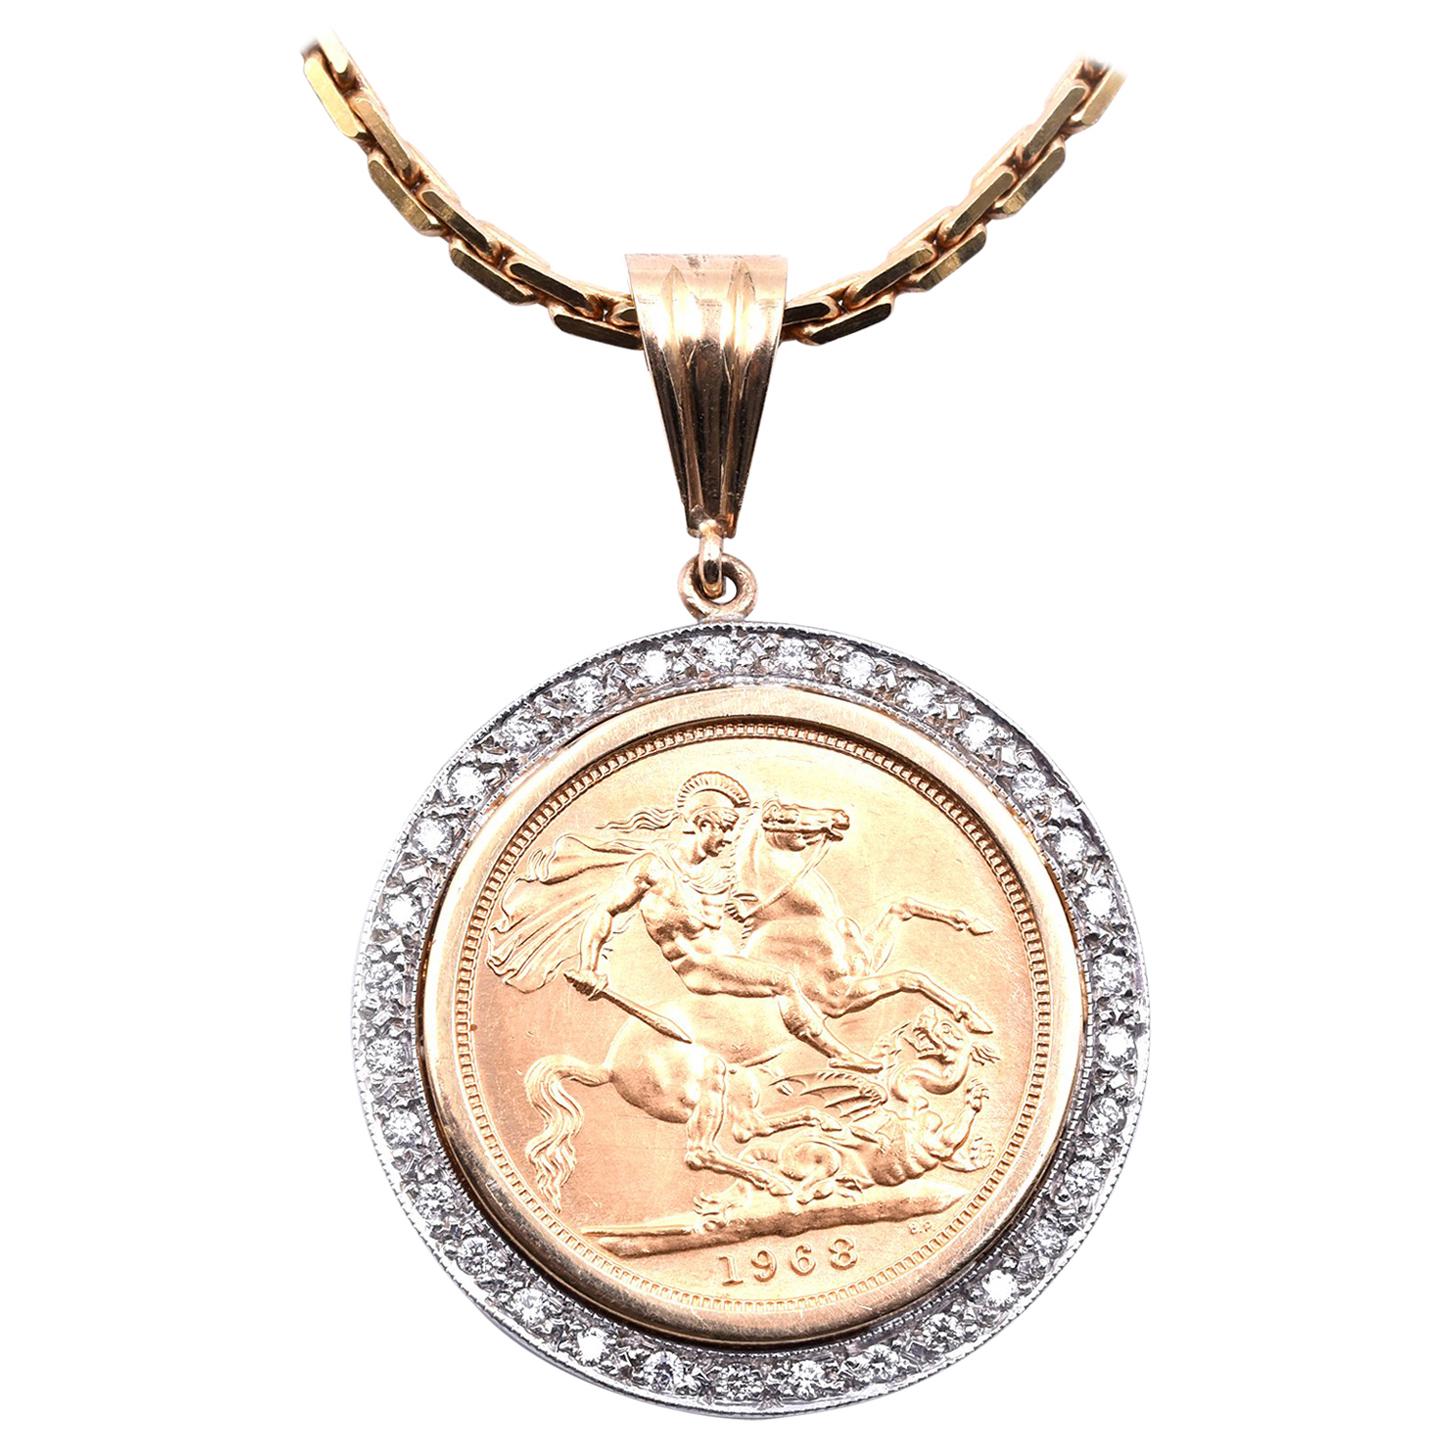 1968 Sovereign Coin with Diamond Bezel and 14 Karat Gold and Diamond Chain